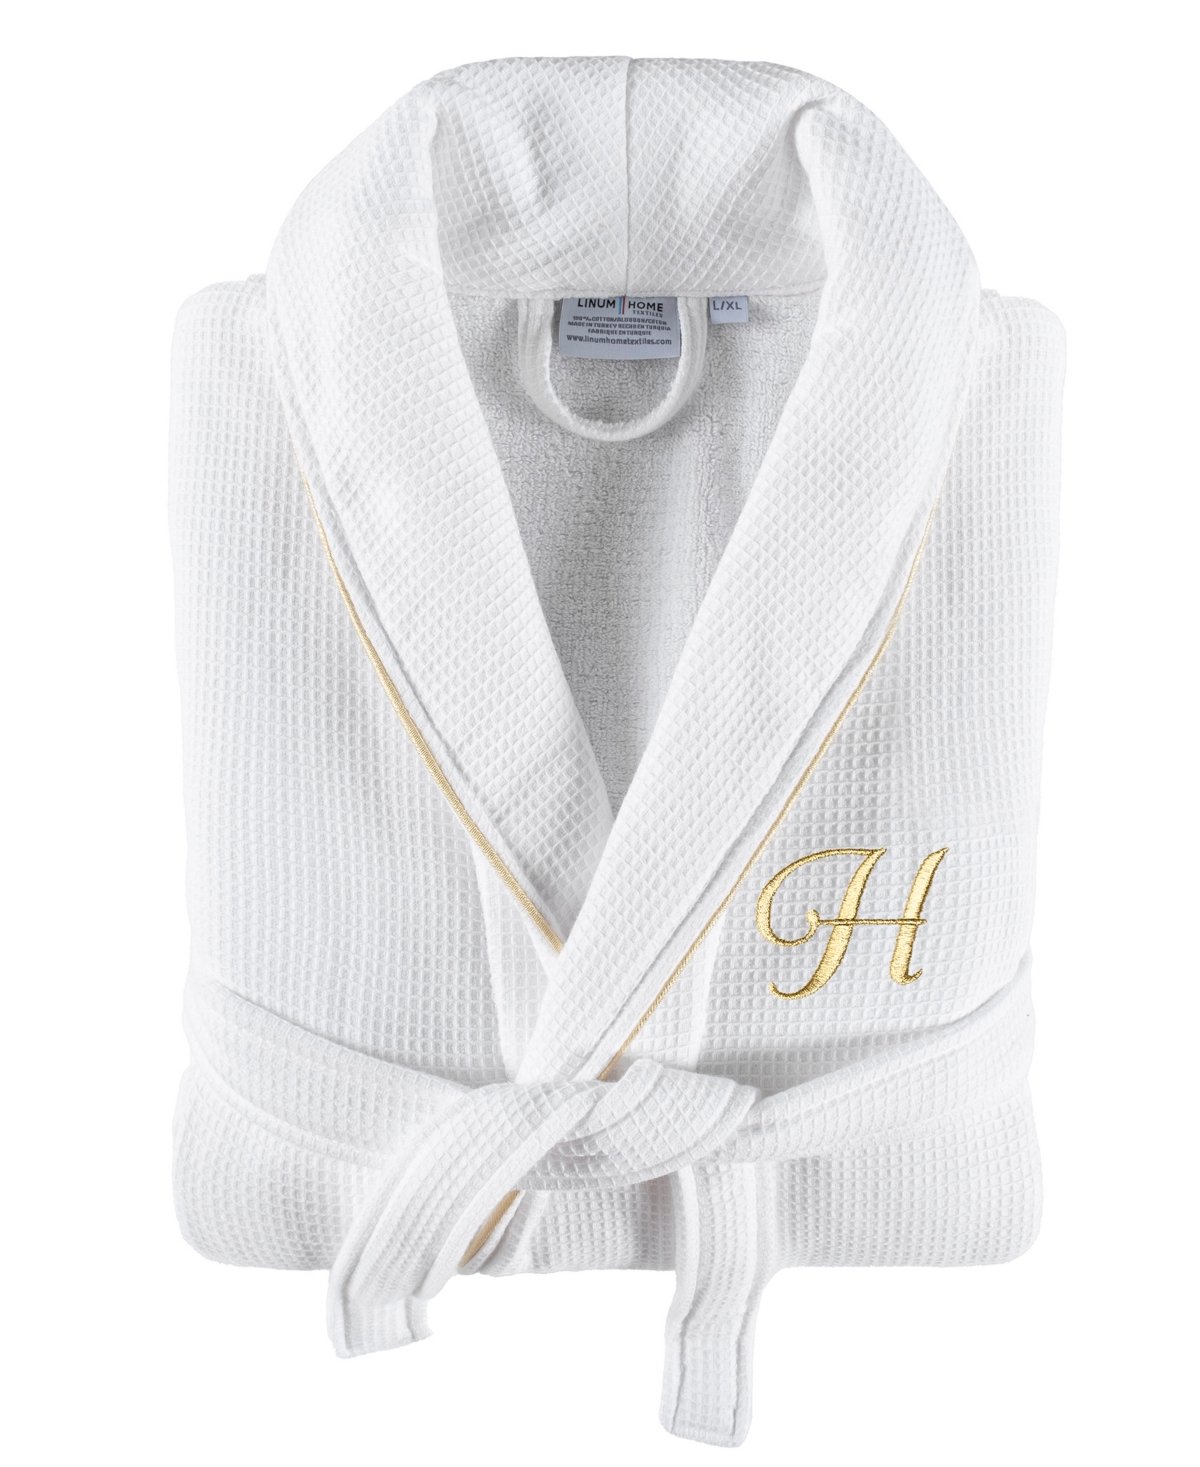 Linum Home Textiles 100% Turkish Cotton Unisex Personalized Waffle Weave Terry Bathrobe With Satin Piped Trim In White H